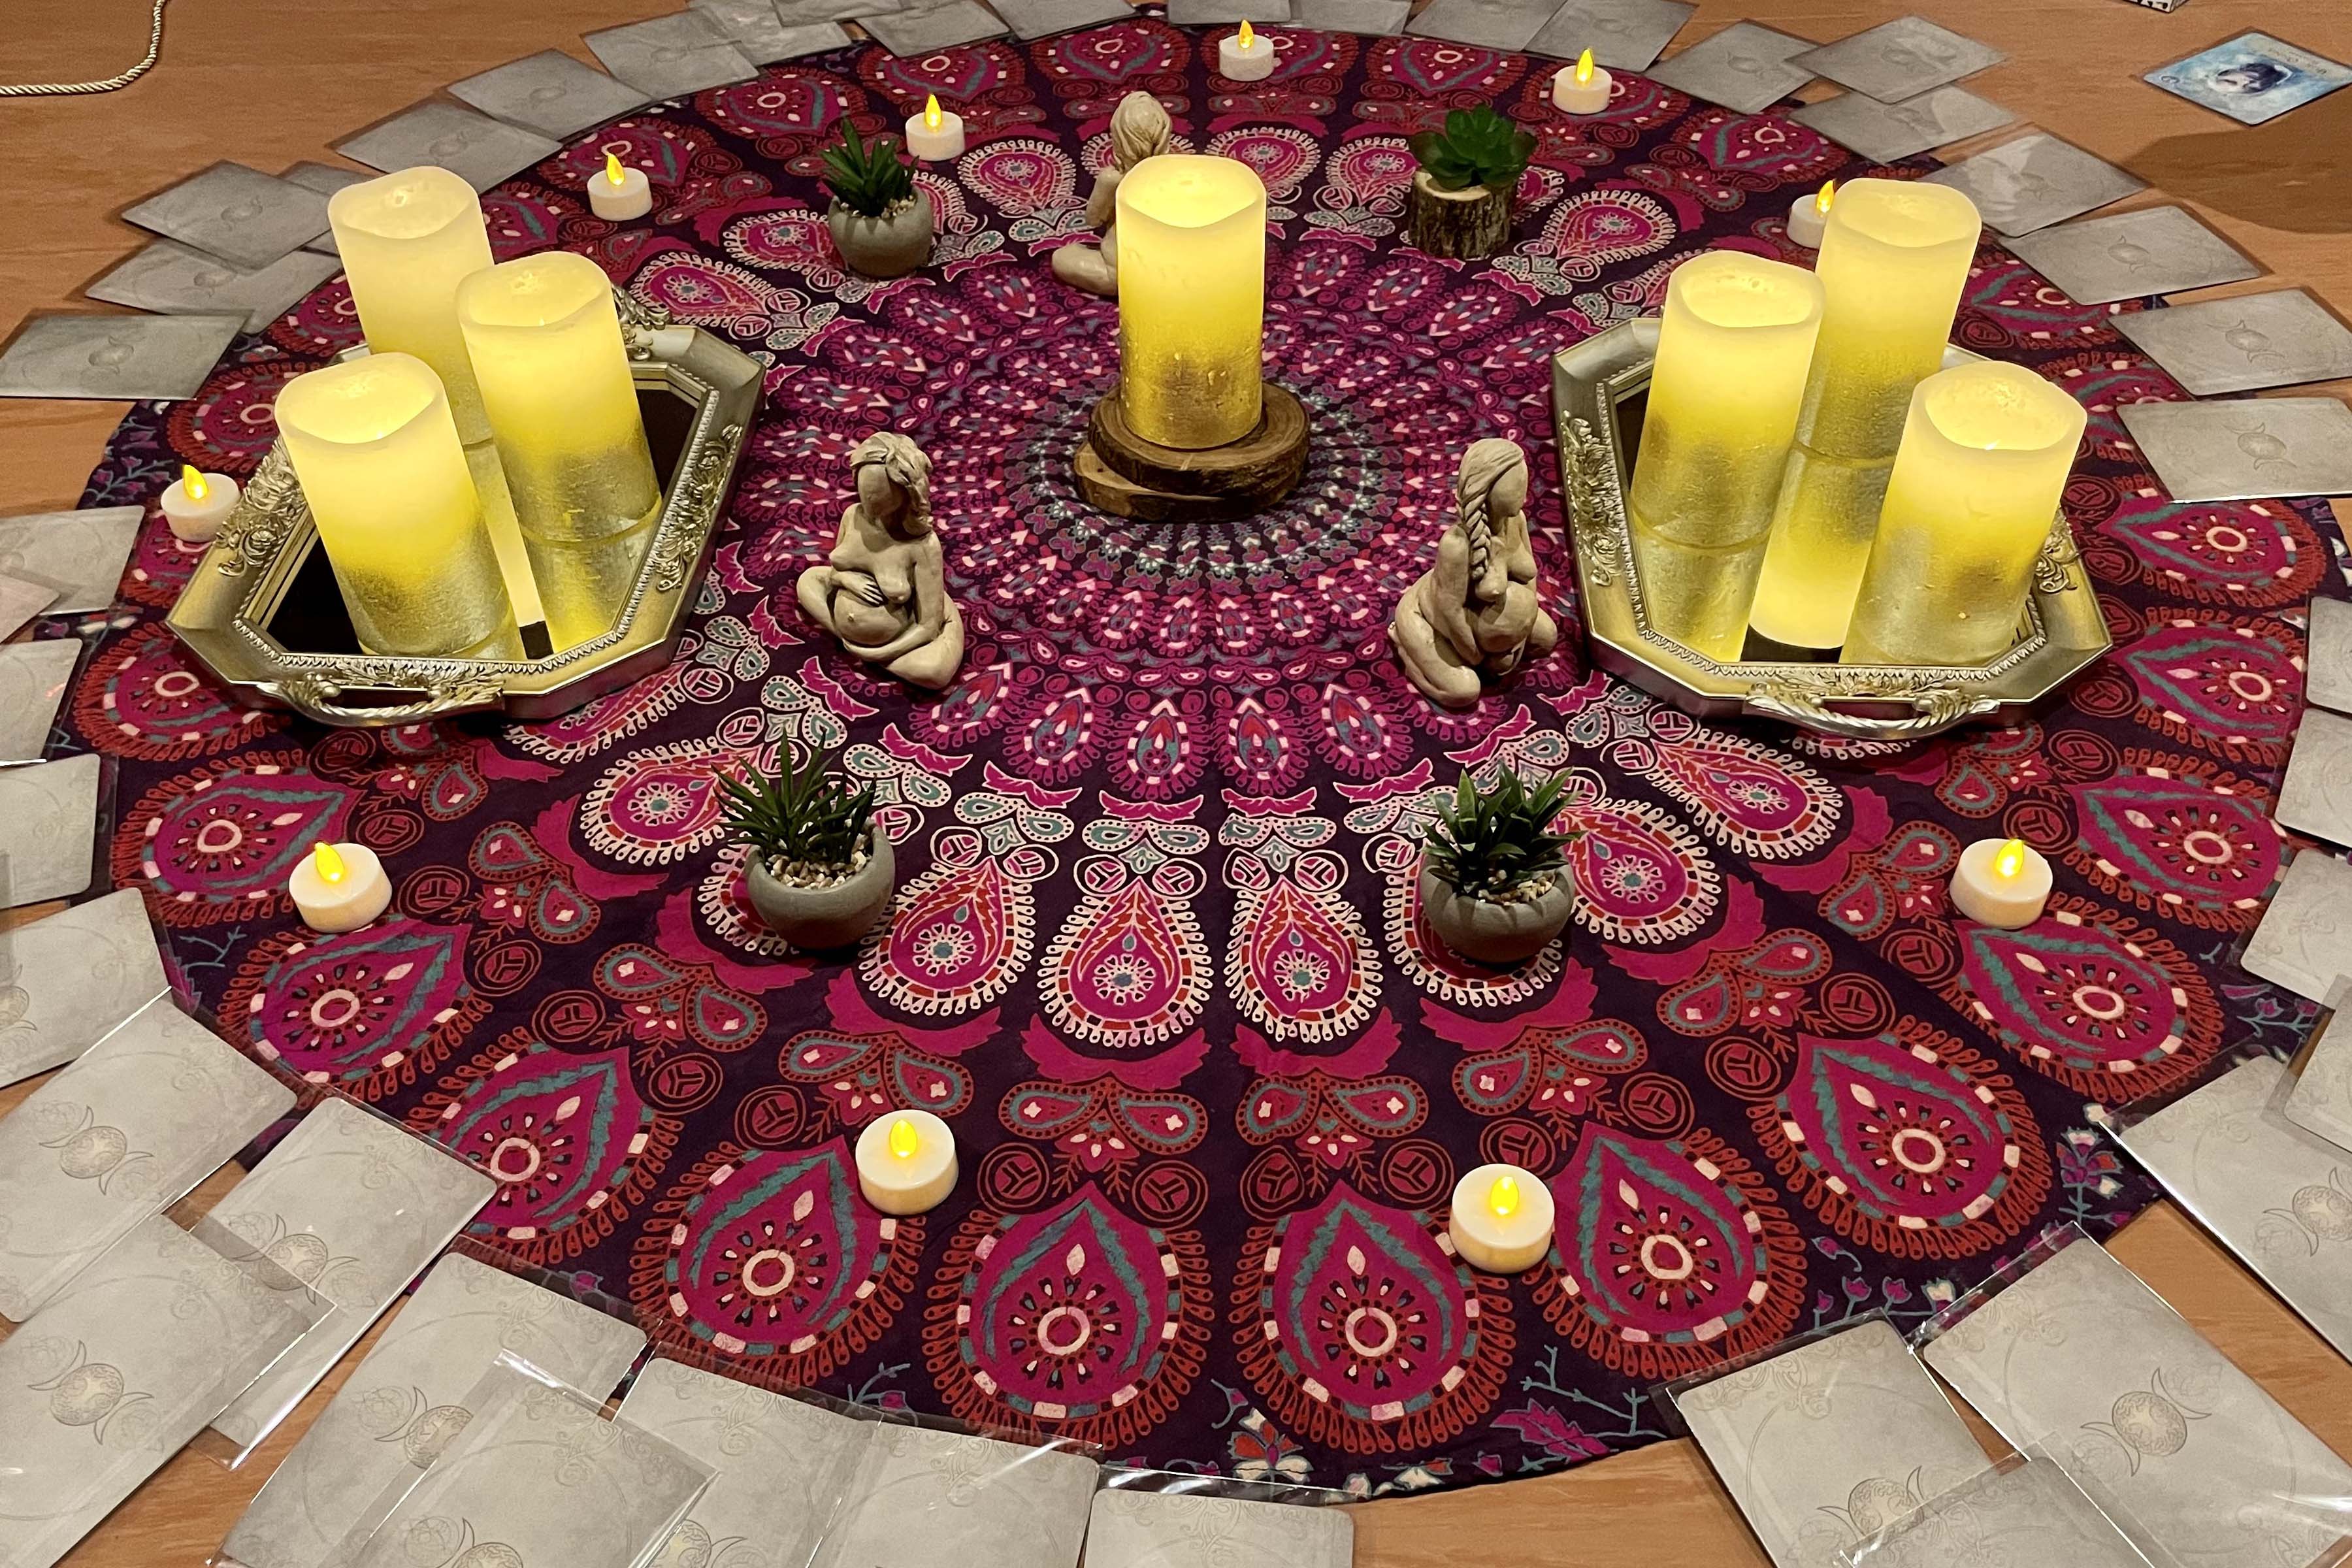 Lana has created a beautiful Sistership Circle shown here with a mandala print tapestry on the floor, surrounded by goddess oracle cards, candles, plants, and statuettes.